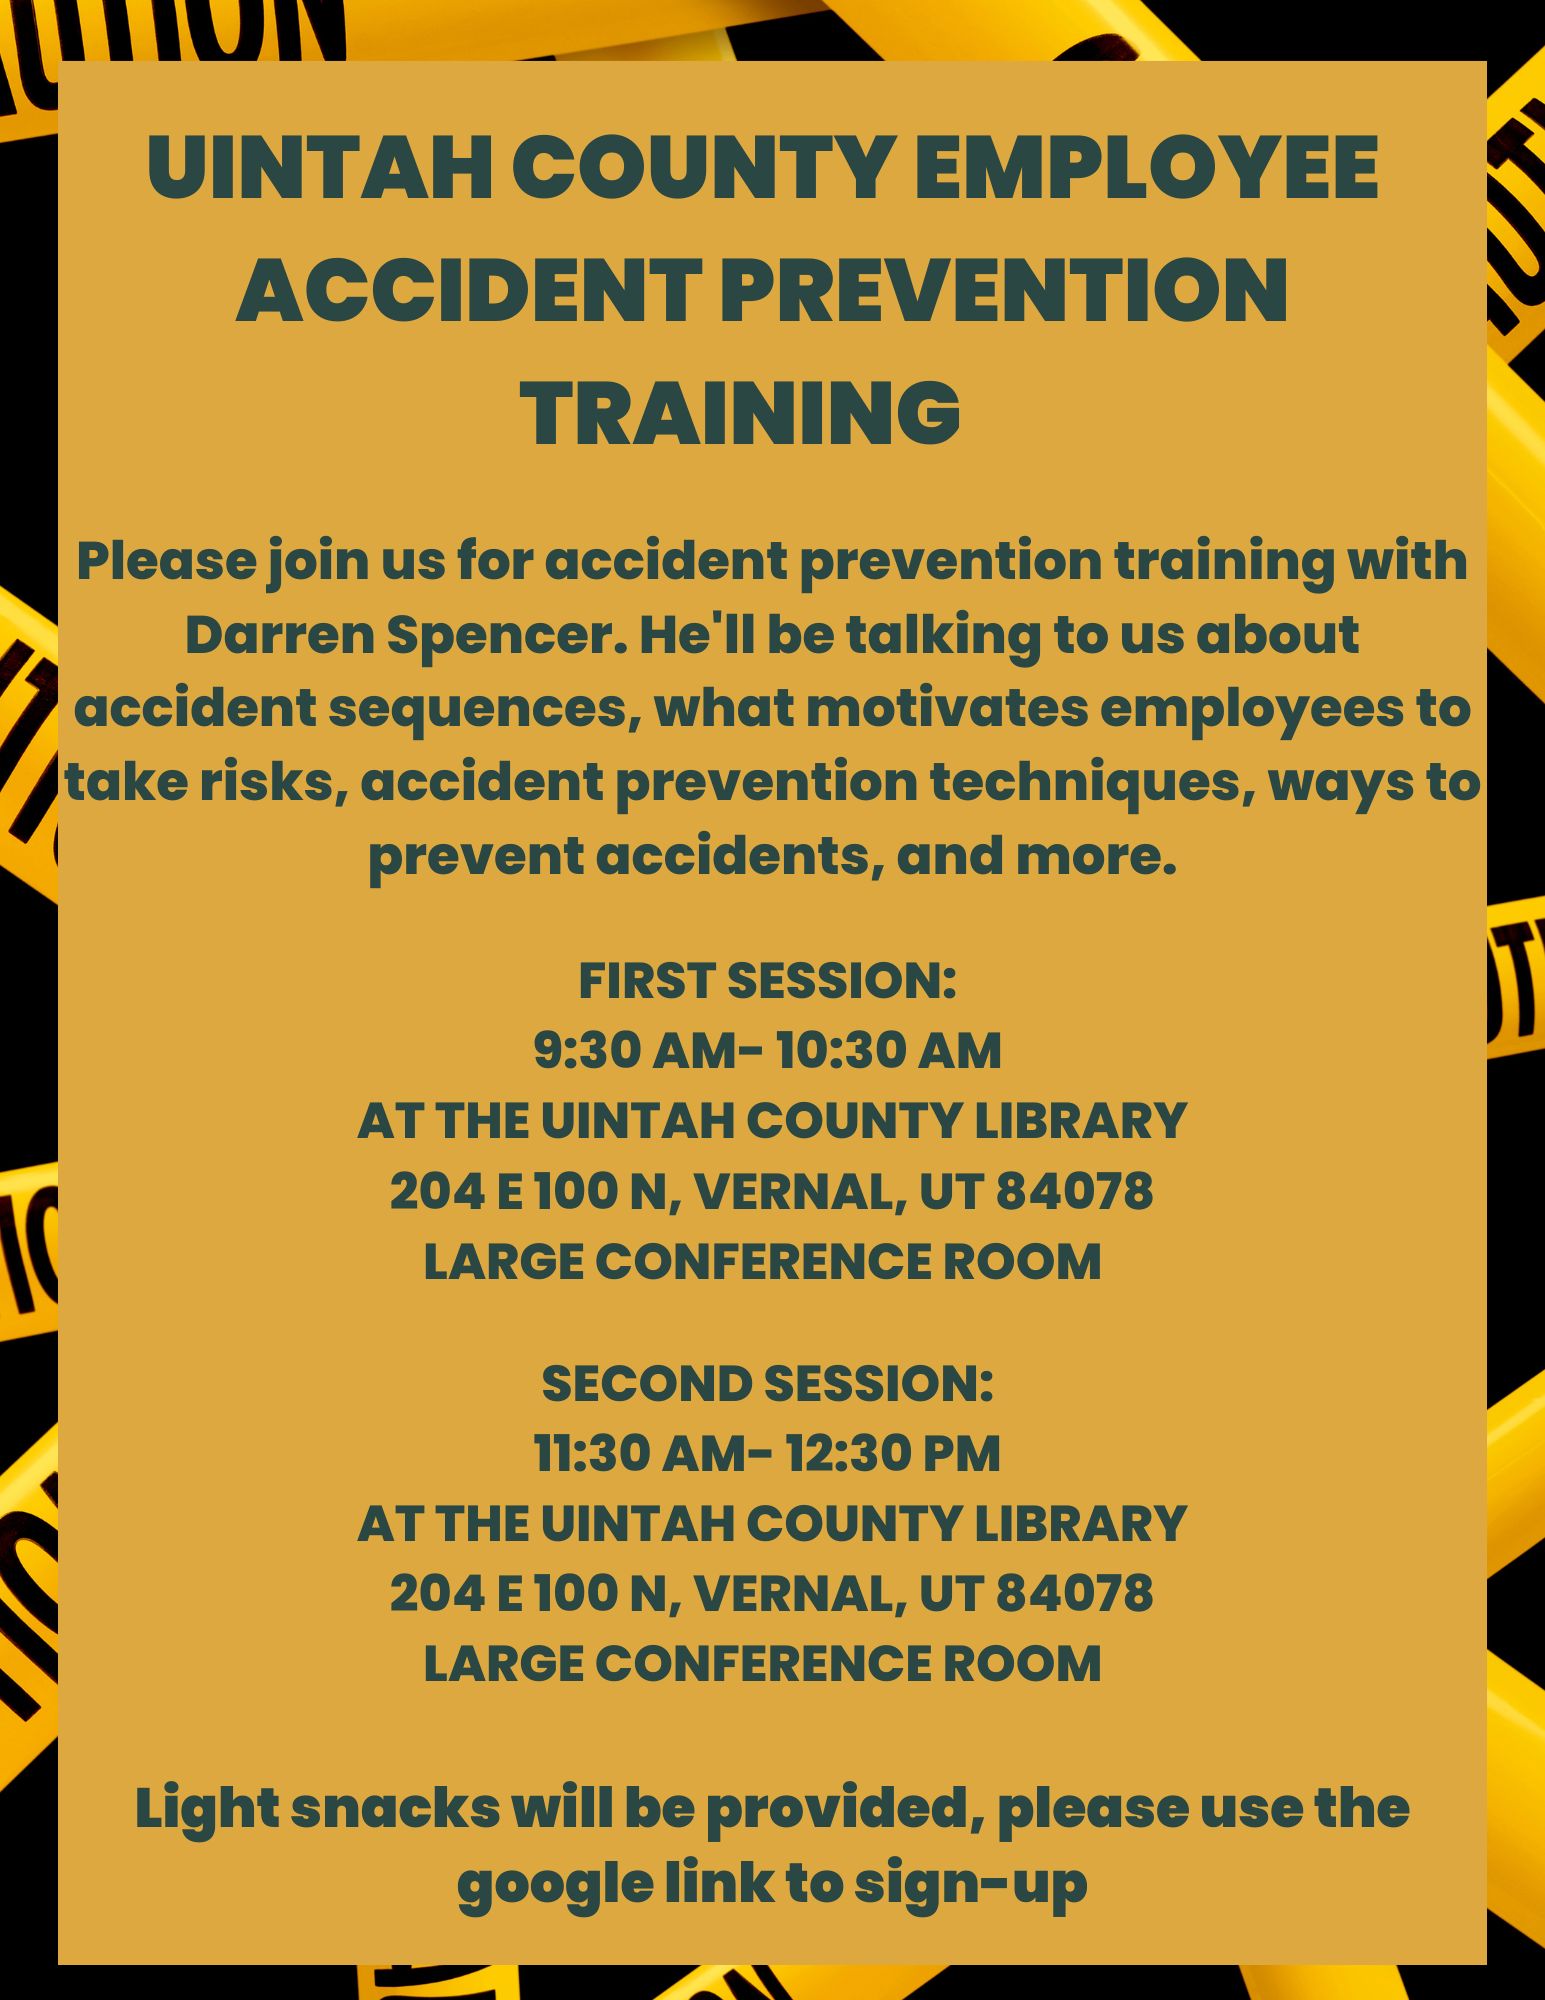 "UINTAH COUNTY EMPLOYEE ACCIDENT PREVENTION TRAINING | Please join us for accident prevention training with Darren Spencer. He'll be talking to us about accident sequences, what motivates employees to take risks, accident prevention techniques, ways to prevent accidents, and more."